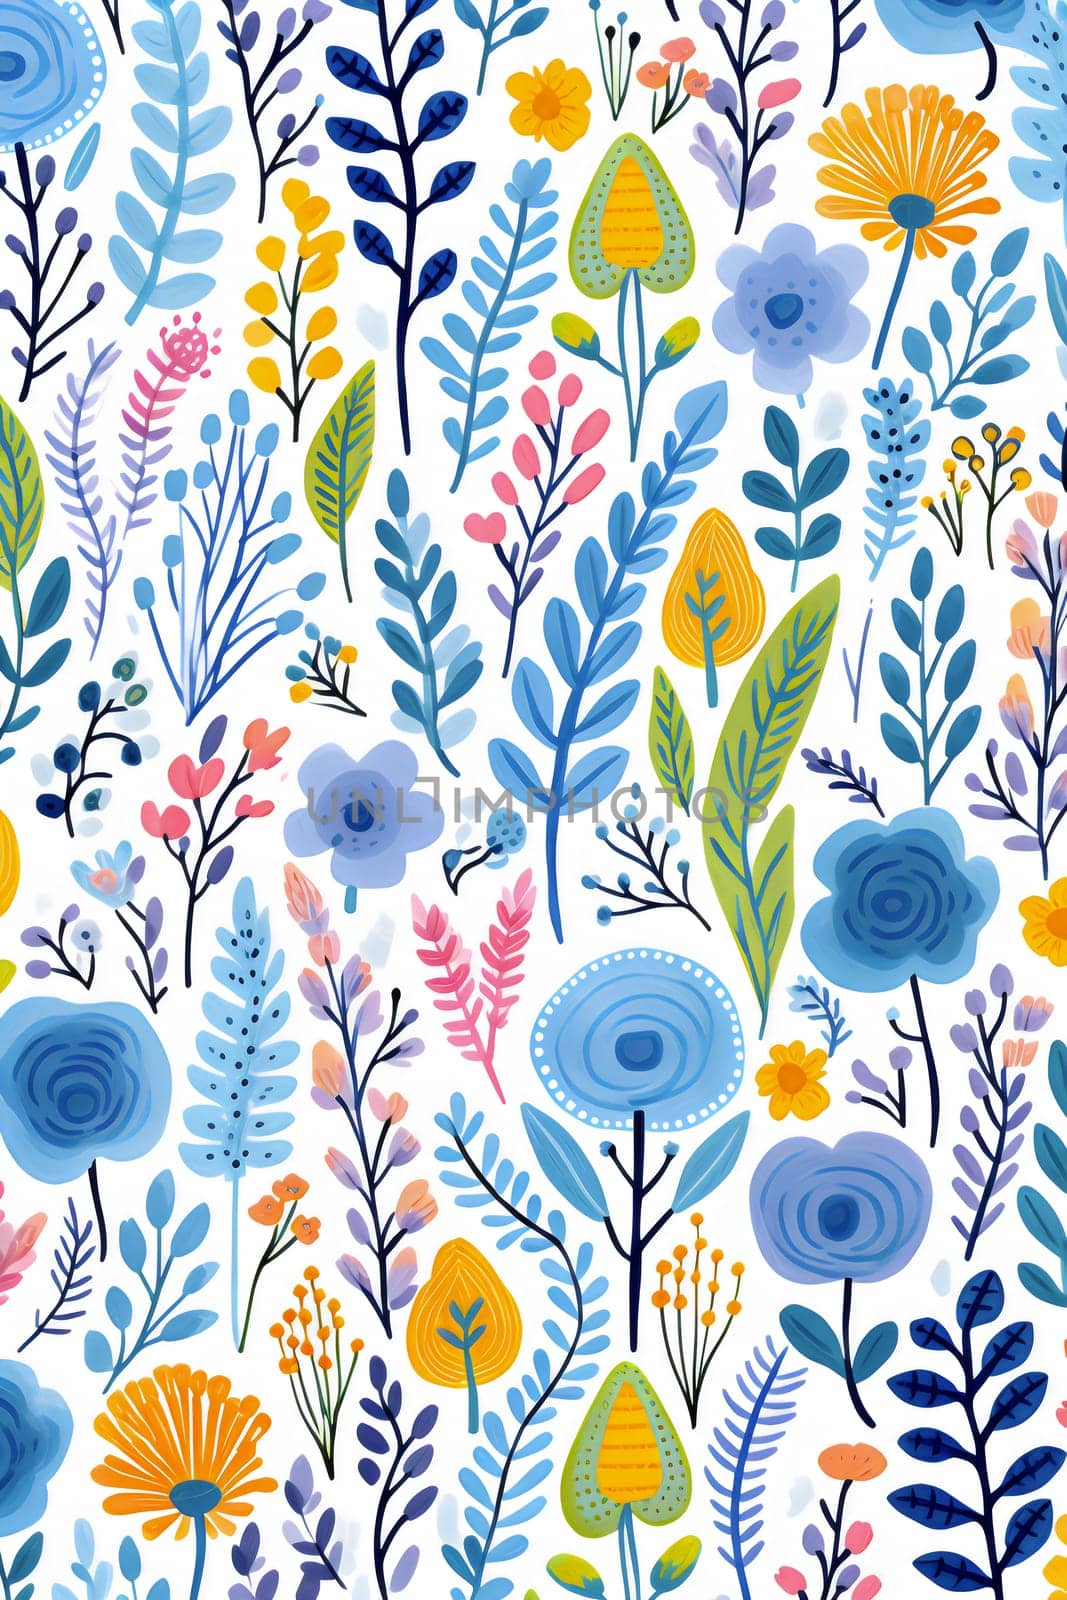 Colorful Floral Pattern With Abstract Botanical Elements by chrisroll